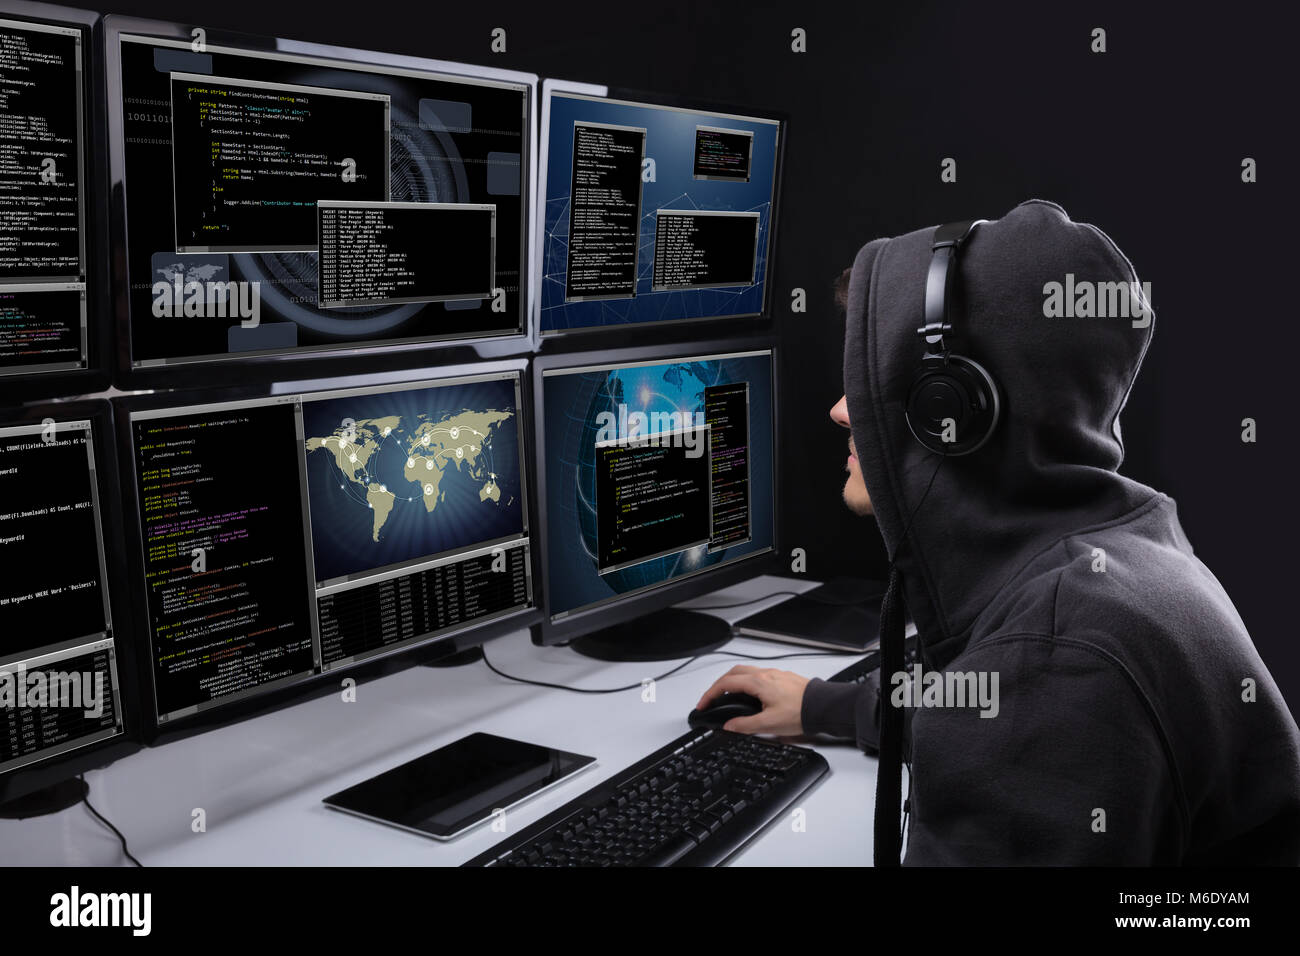 Rear View Of A Hacker Using Multiple Computers For Stealing Data In Office Stock Photo